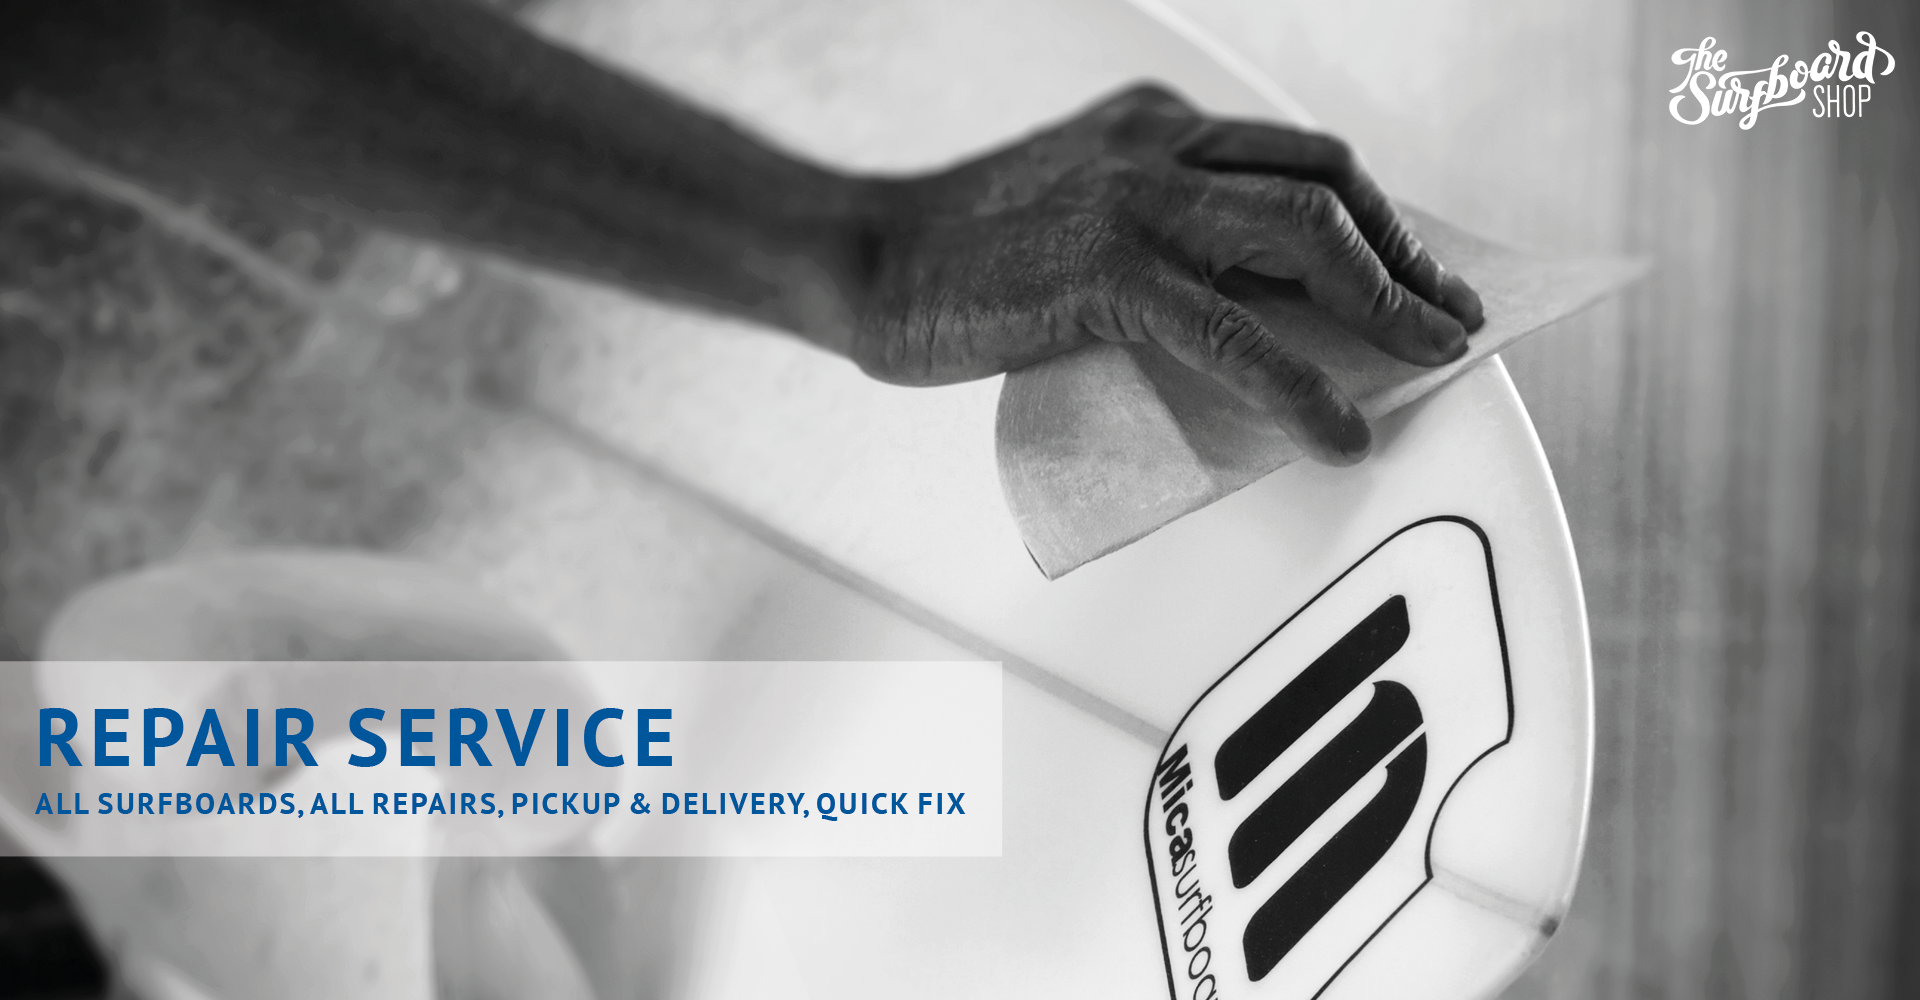 Surfboard Ding Repair Service Ericeira, Lisboa - All surfboards, quick fix, pickup&delivery service